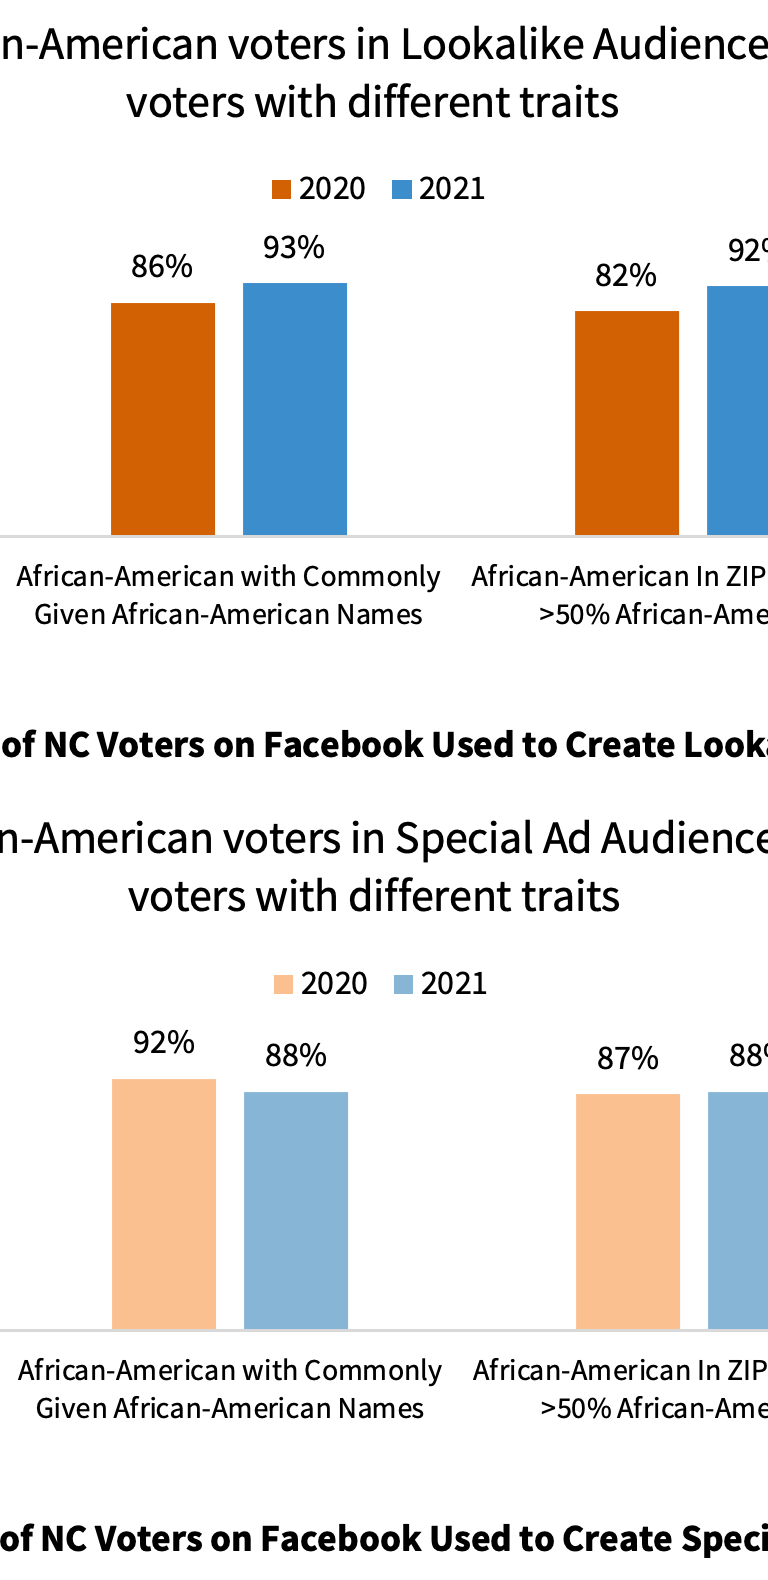 Sample share of African-American voters in Lookalike (top) and Special Ad (bottom) audiences based on lists of North Carolina voters with different traits